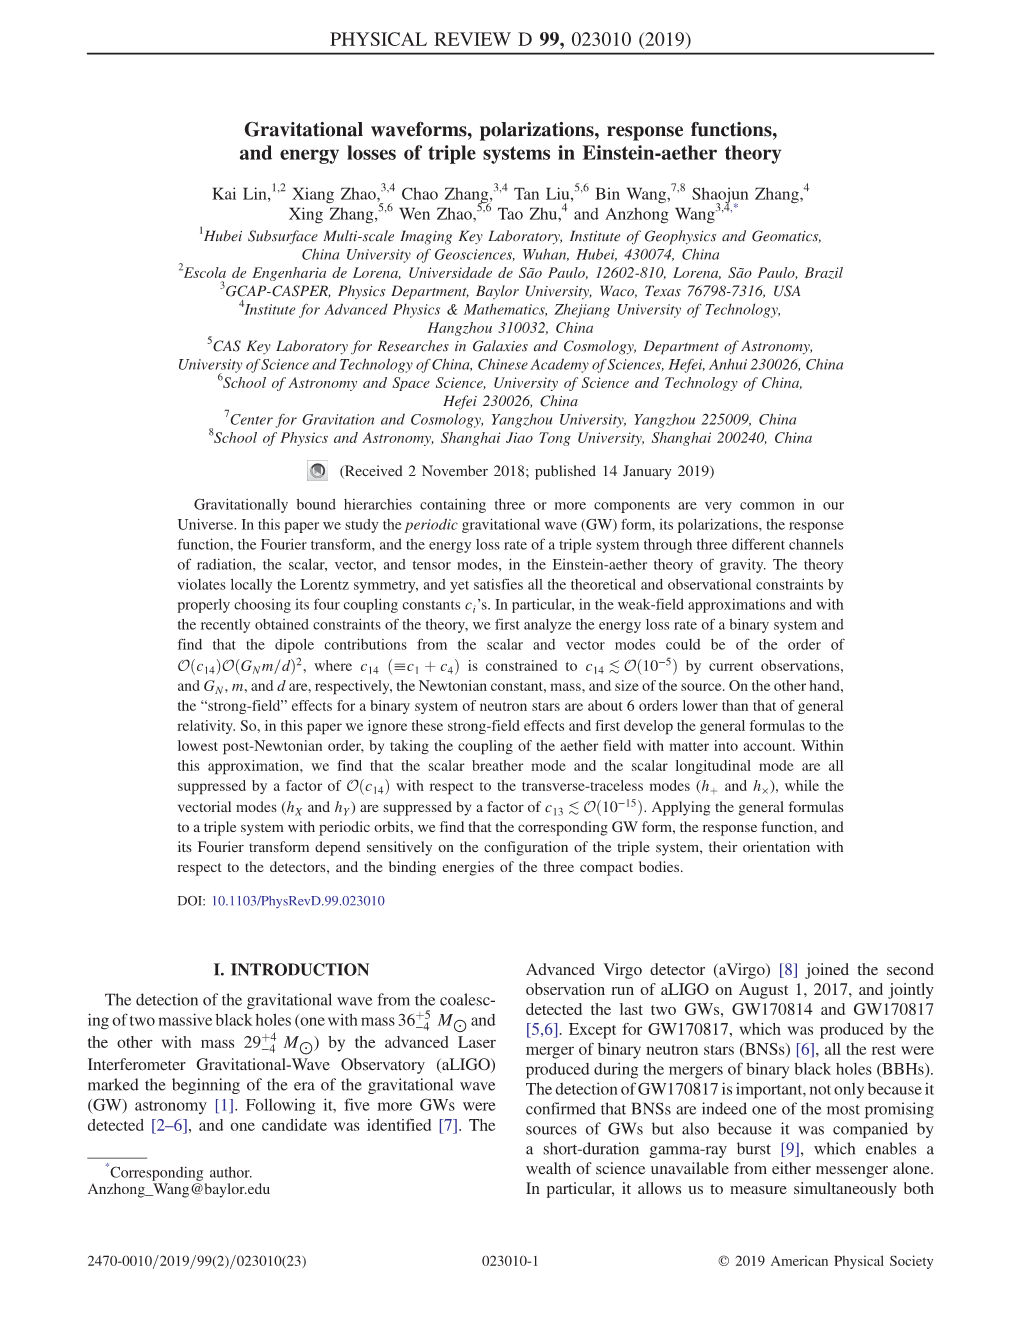 Gravitational Waveforms, Polarizations, Response Functions, and Energy Losses of Triple Systems in Einstein-Aether Theory